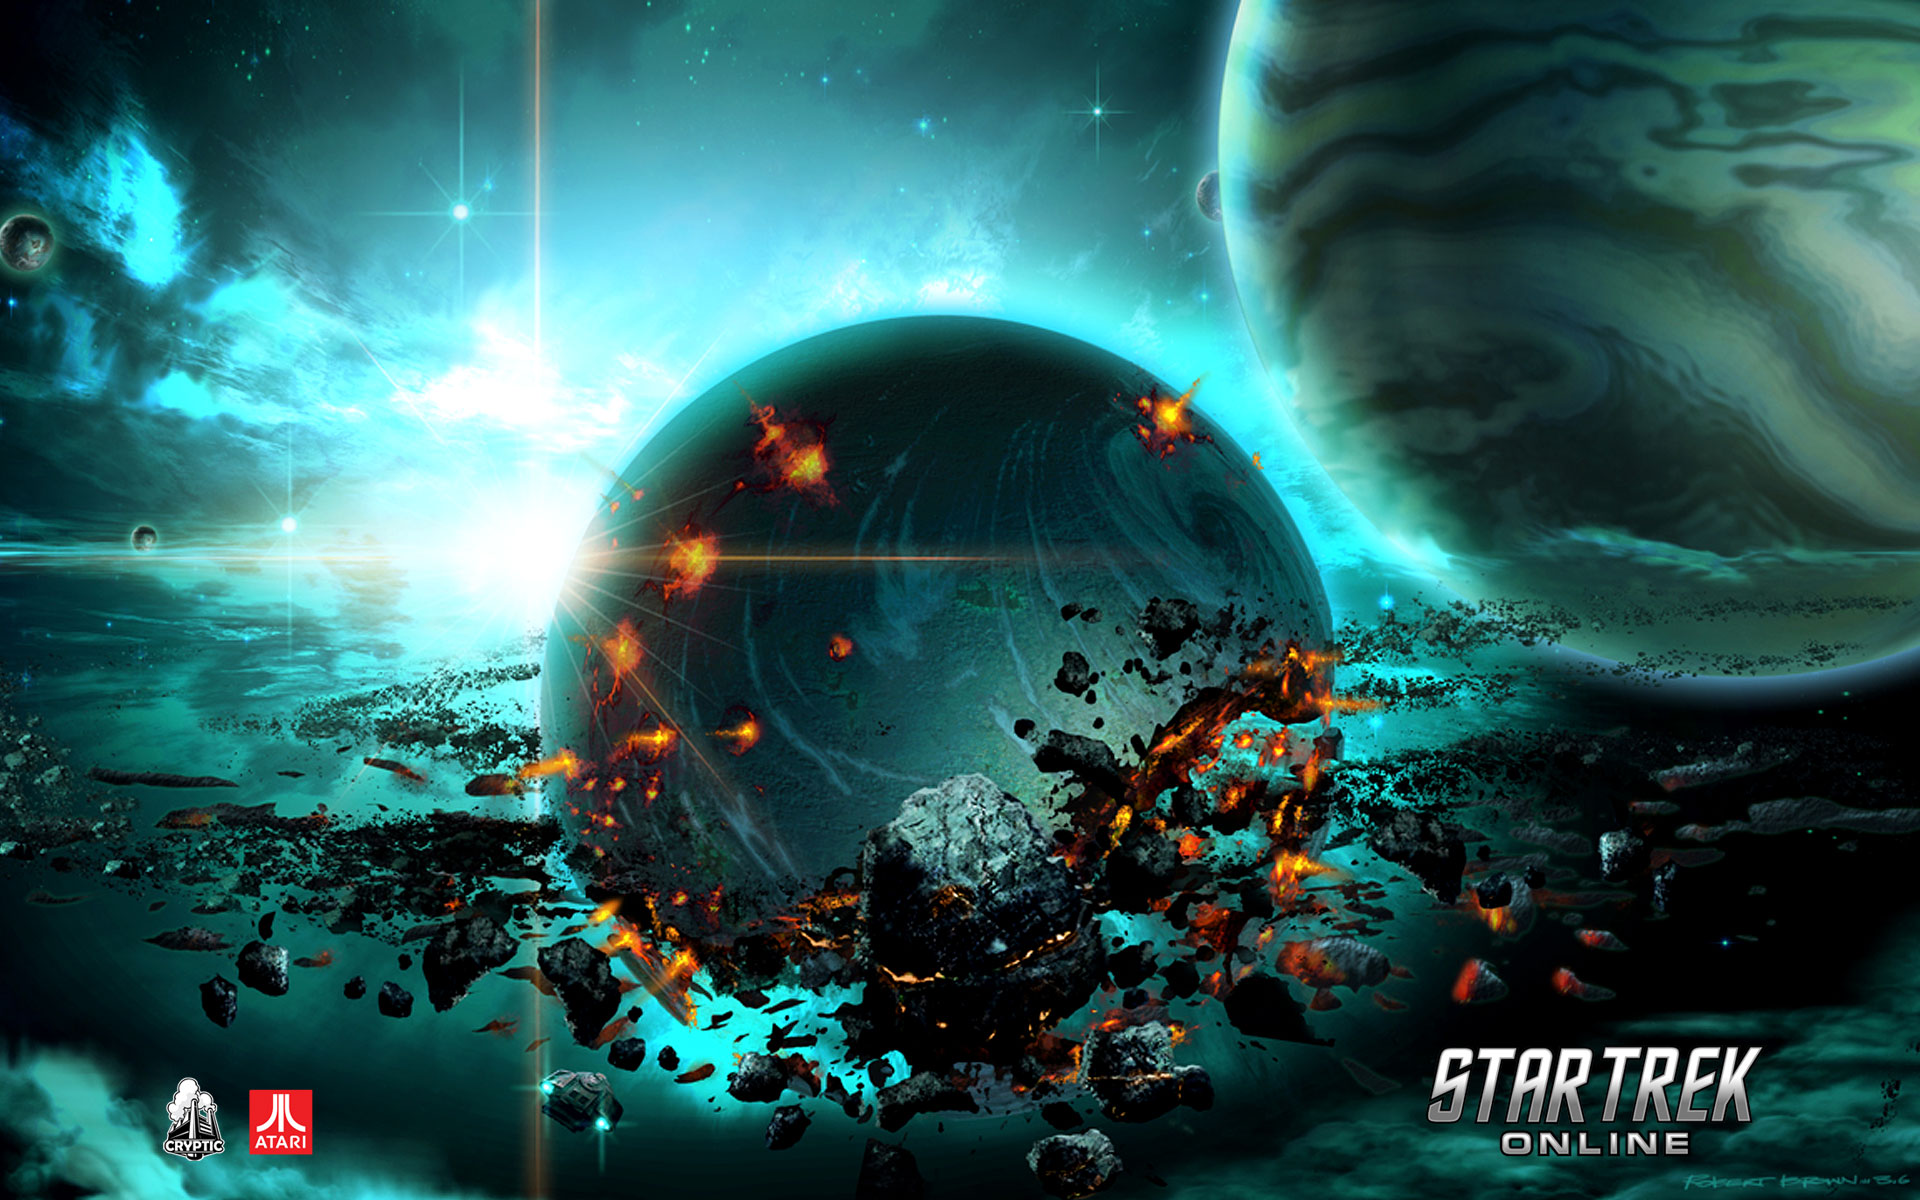 Star Trek Online Free Desktop Wallpapers for HD, Widescreen and other